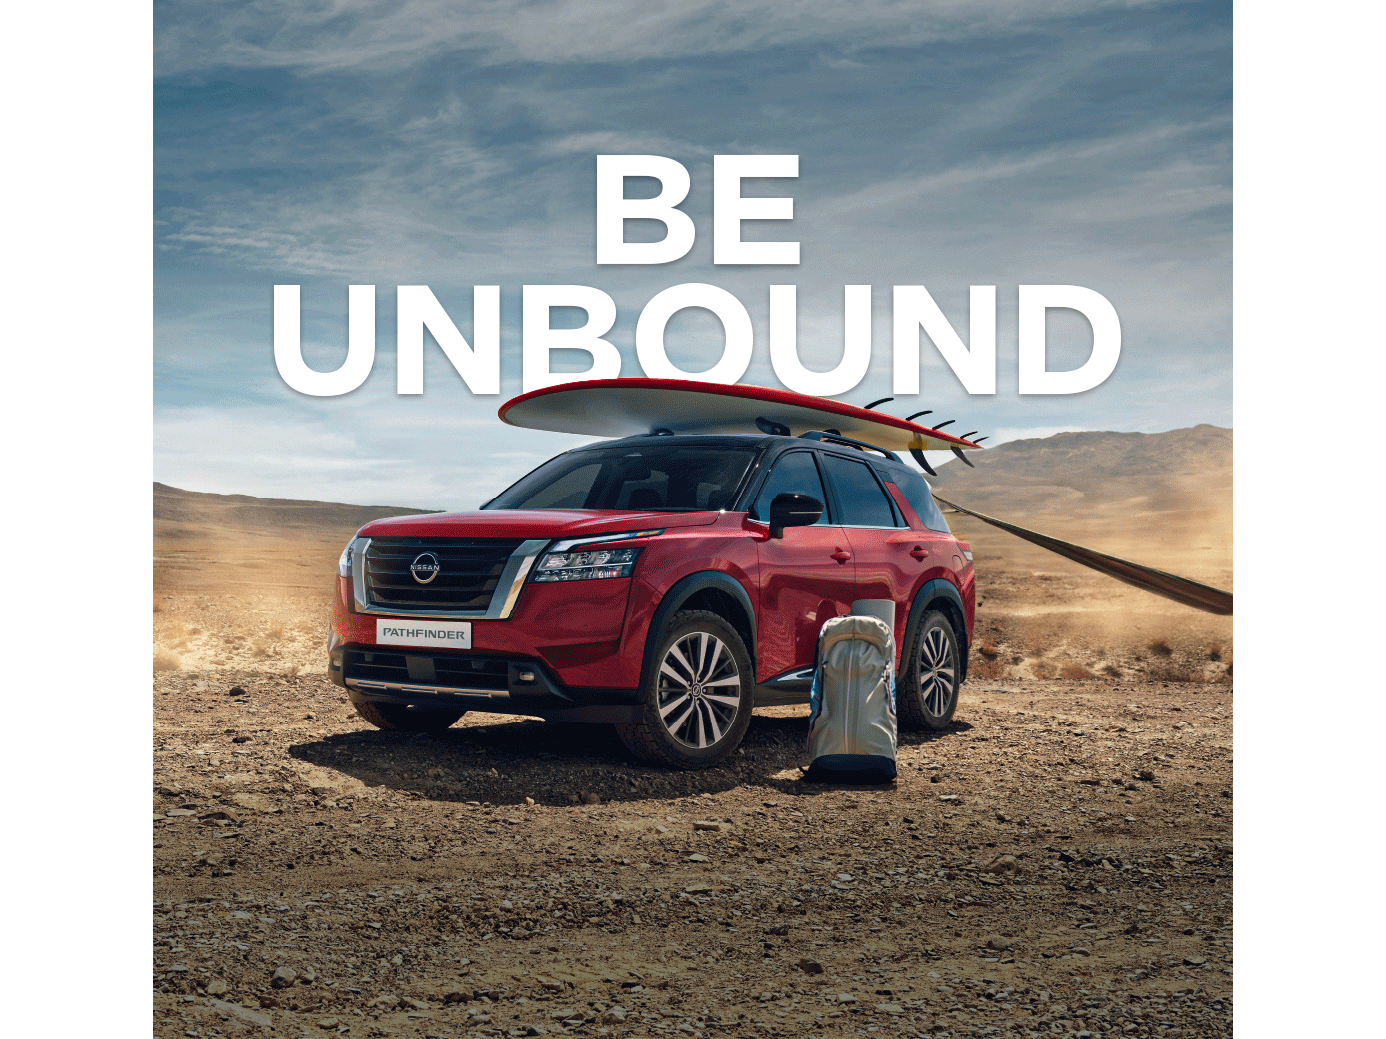 Nissan’s 'Be Unbound' campaign invites people to follow their true passions by applying for the dream job sabbatical